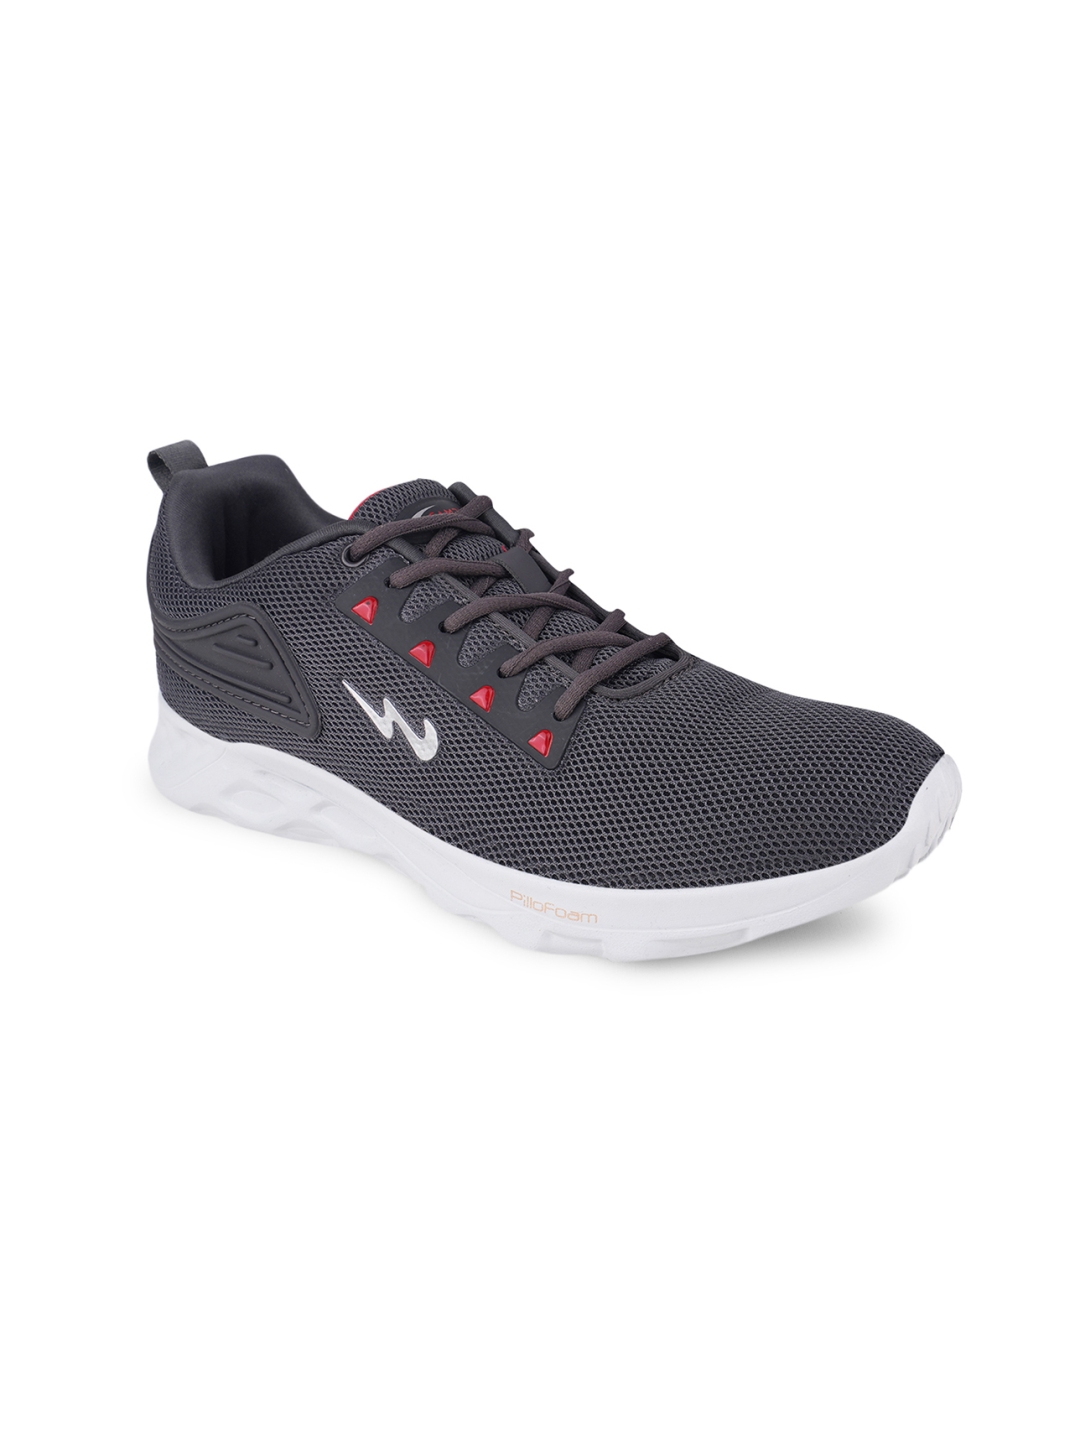 Buy Campus Men Grey & White Mesh Running Shoes - Sports Shoes for Men ...